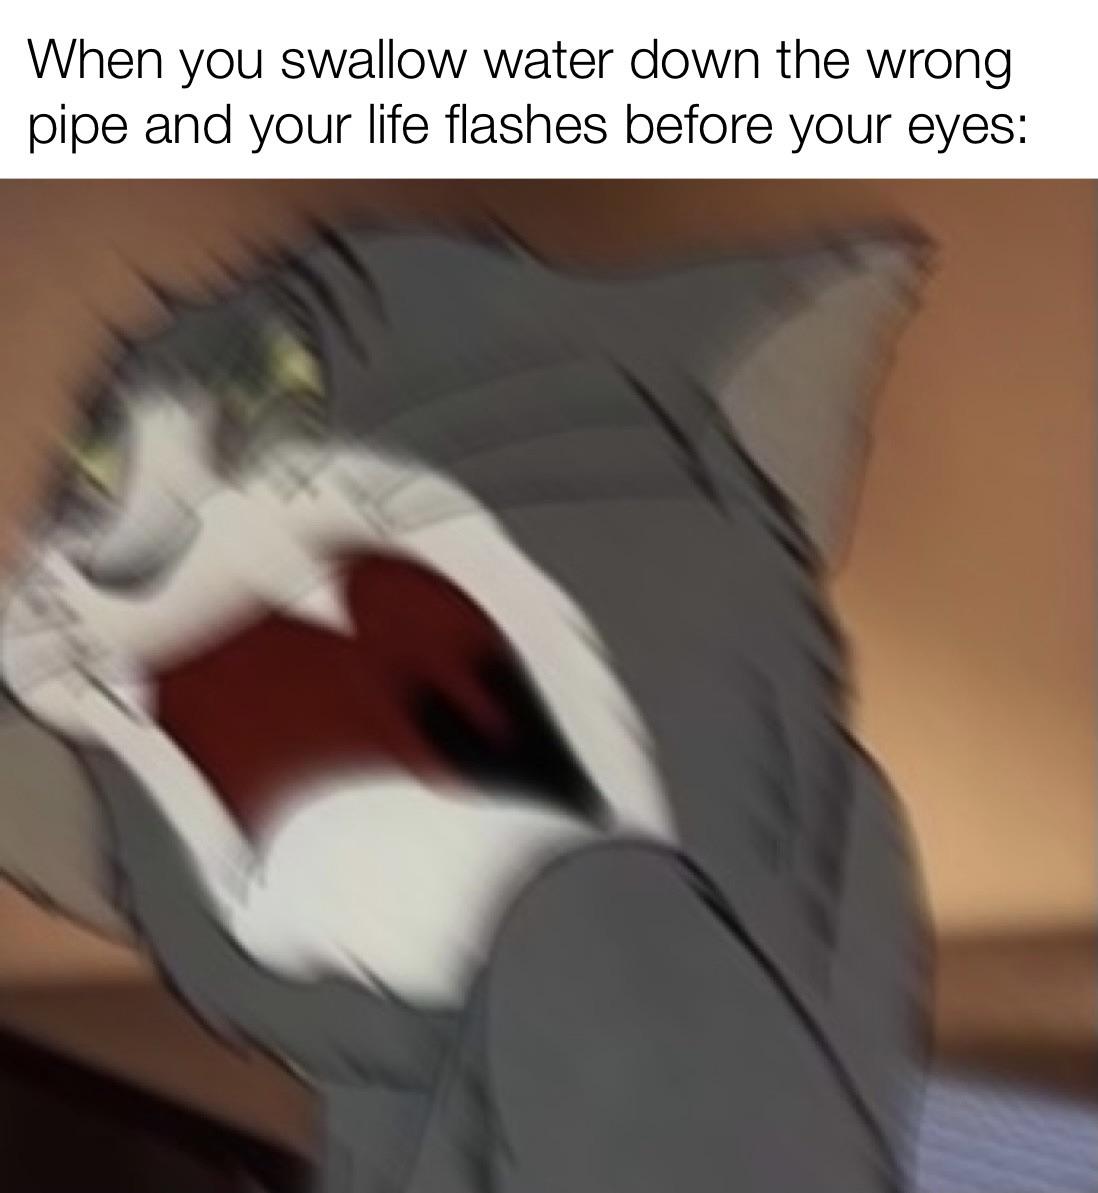 dank memes - funny memes - tom no meme - When you swallow water down the wrong pipe and your life flashes before your eyes